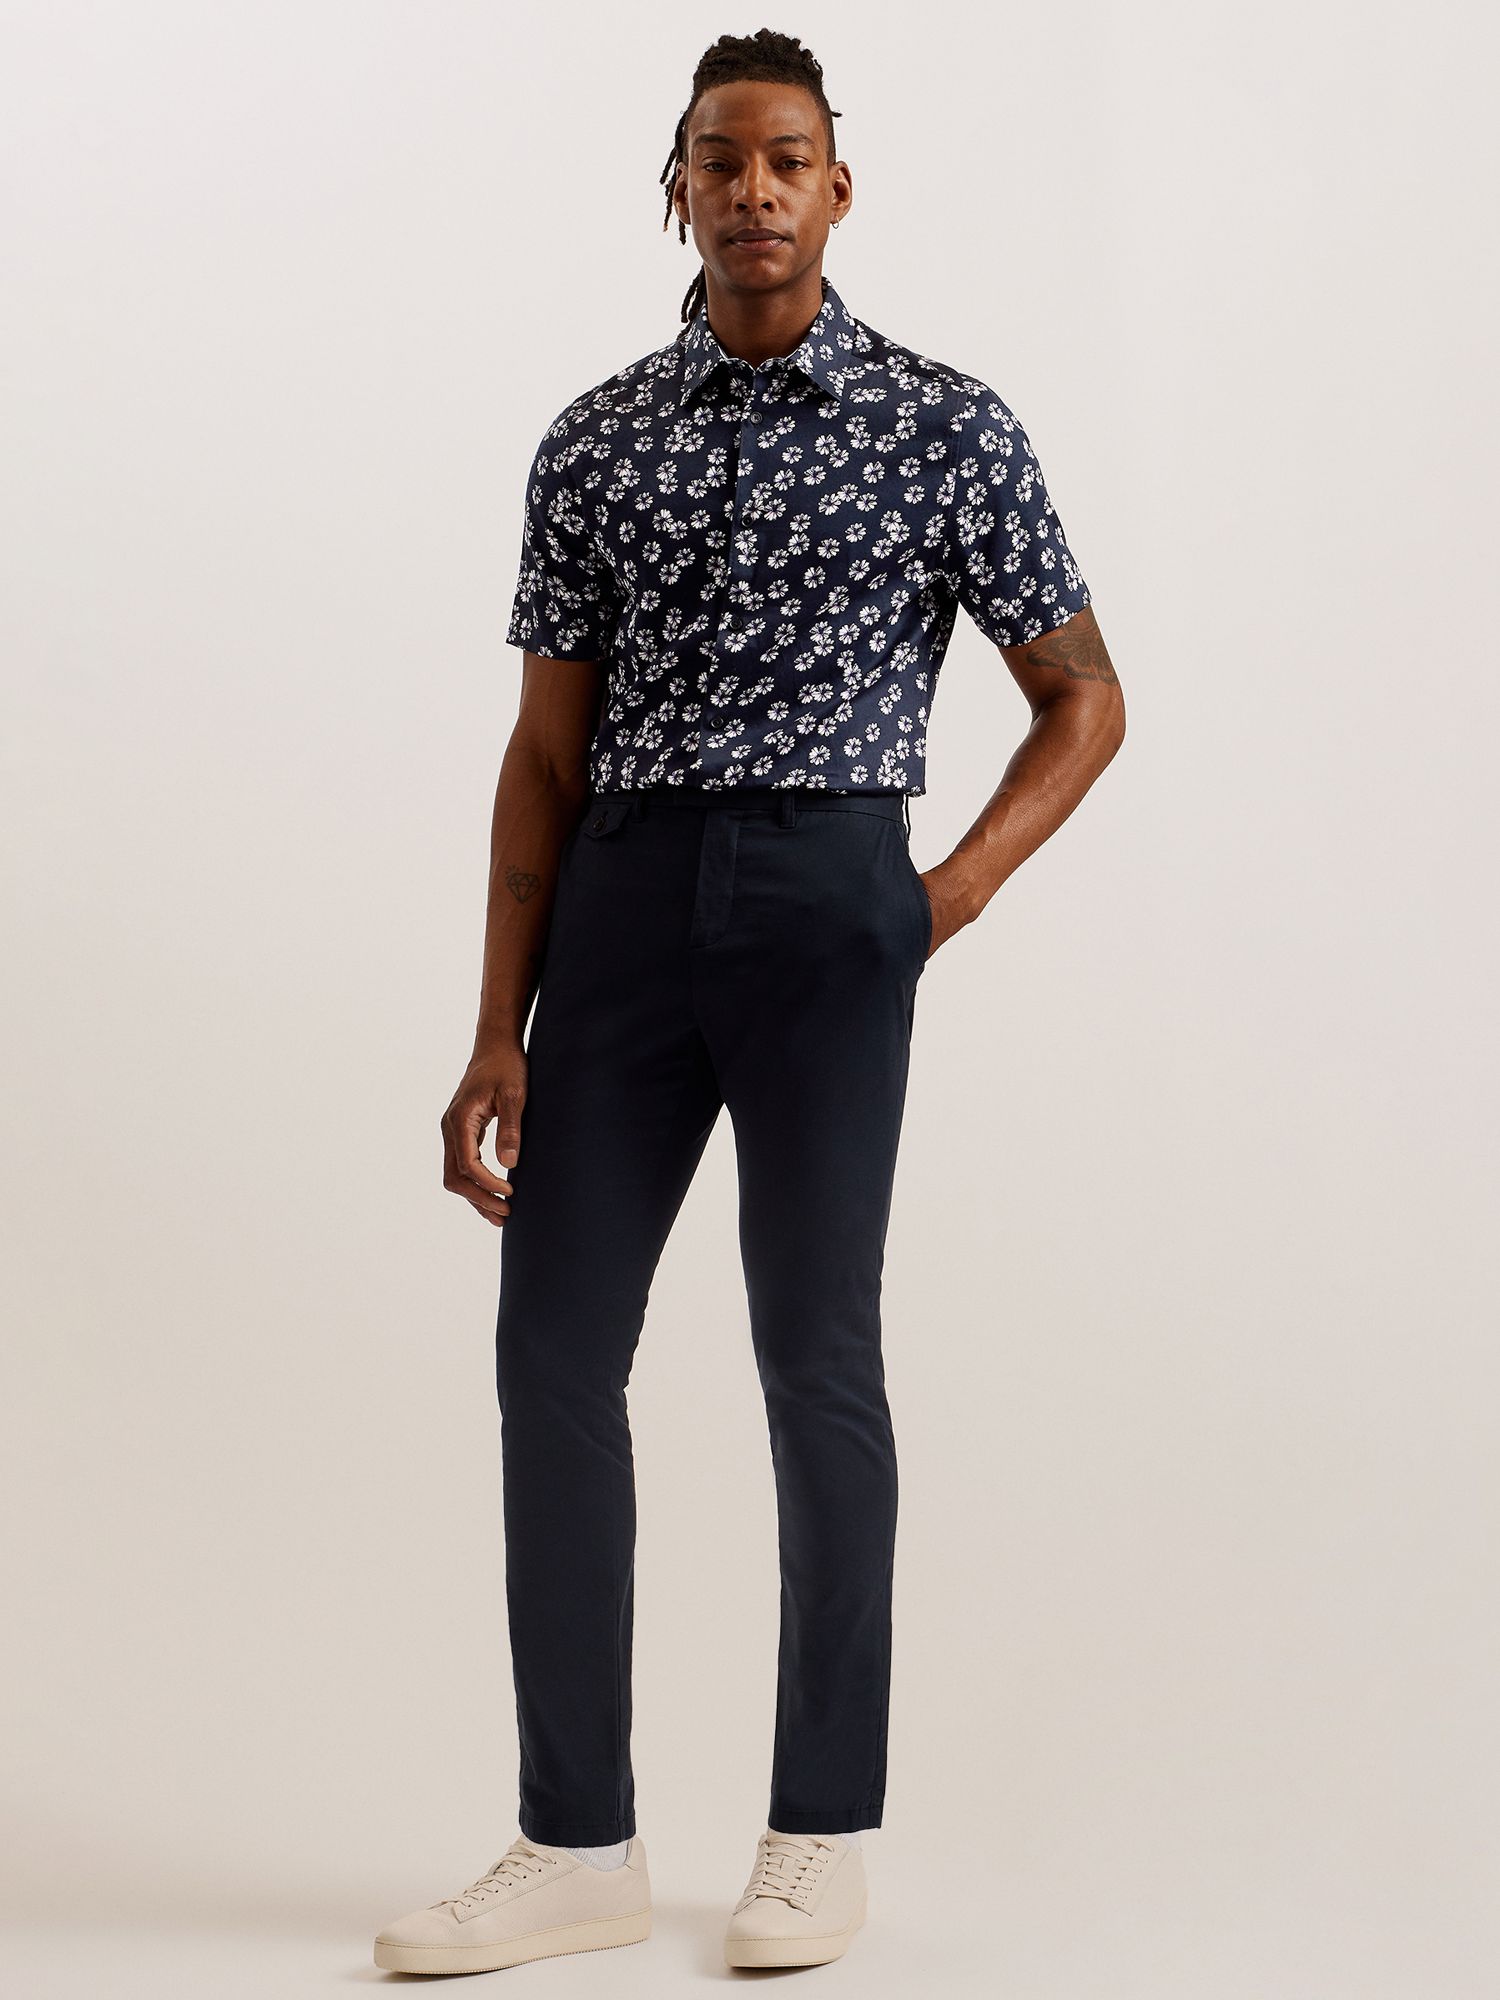 Ted Baker Alfanso Short Sleeve Floral Shirt, Blue Navy, XS